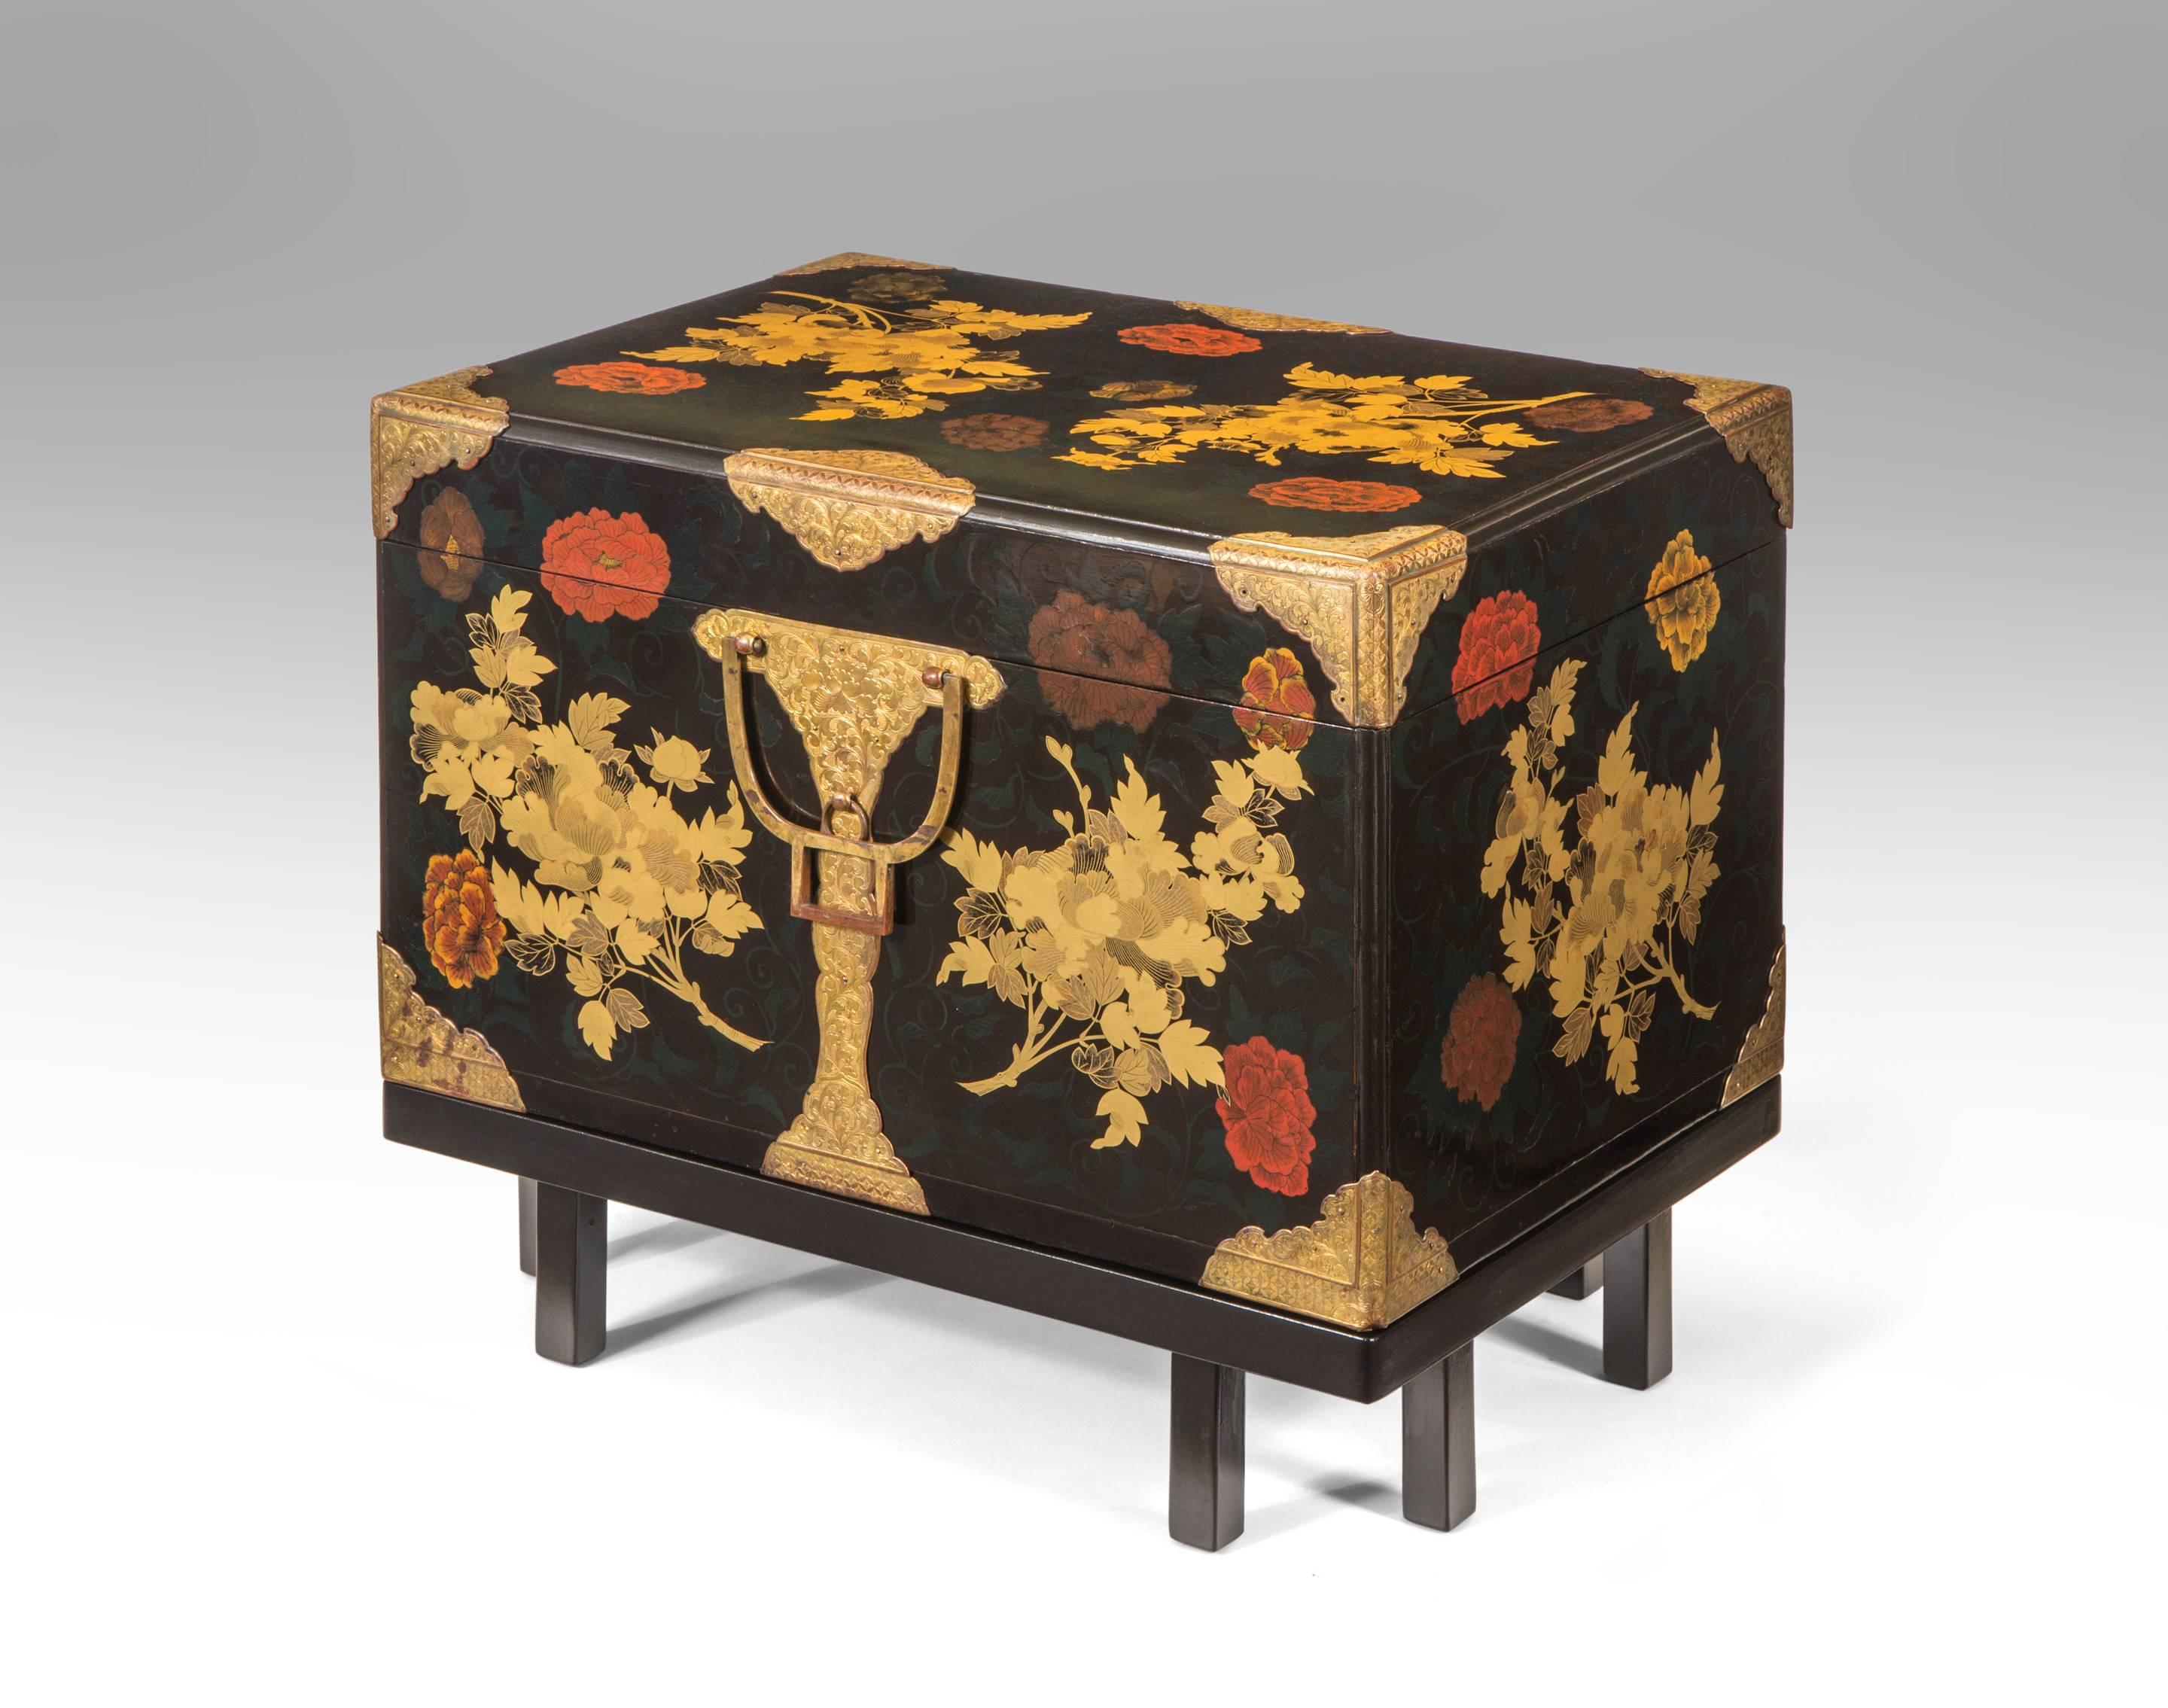 This gorgeous box is a rare example of decoration inspired by the Rimpa period. The whole adorned in golden peony branches against background of green trailing vines and polychromatic peony blossoms, the gilt copper mounts also engraved with